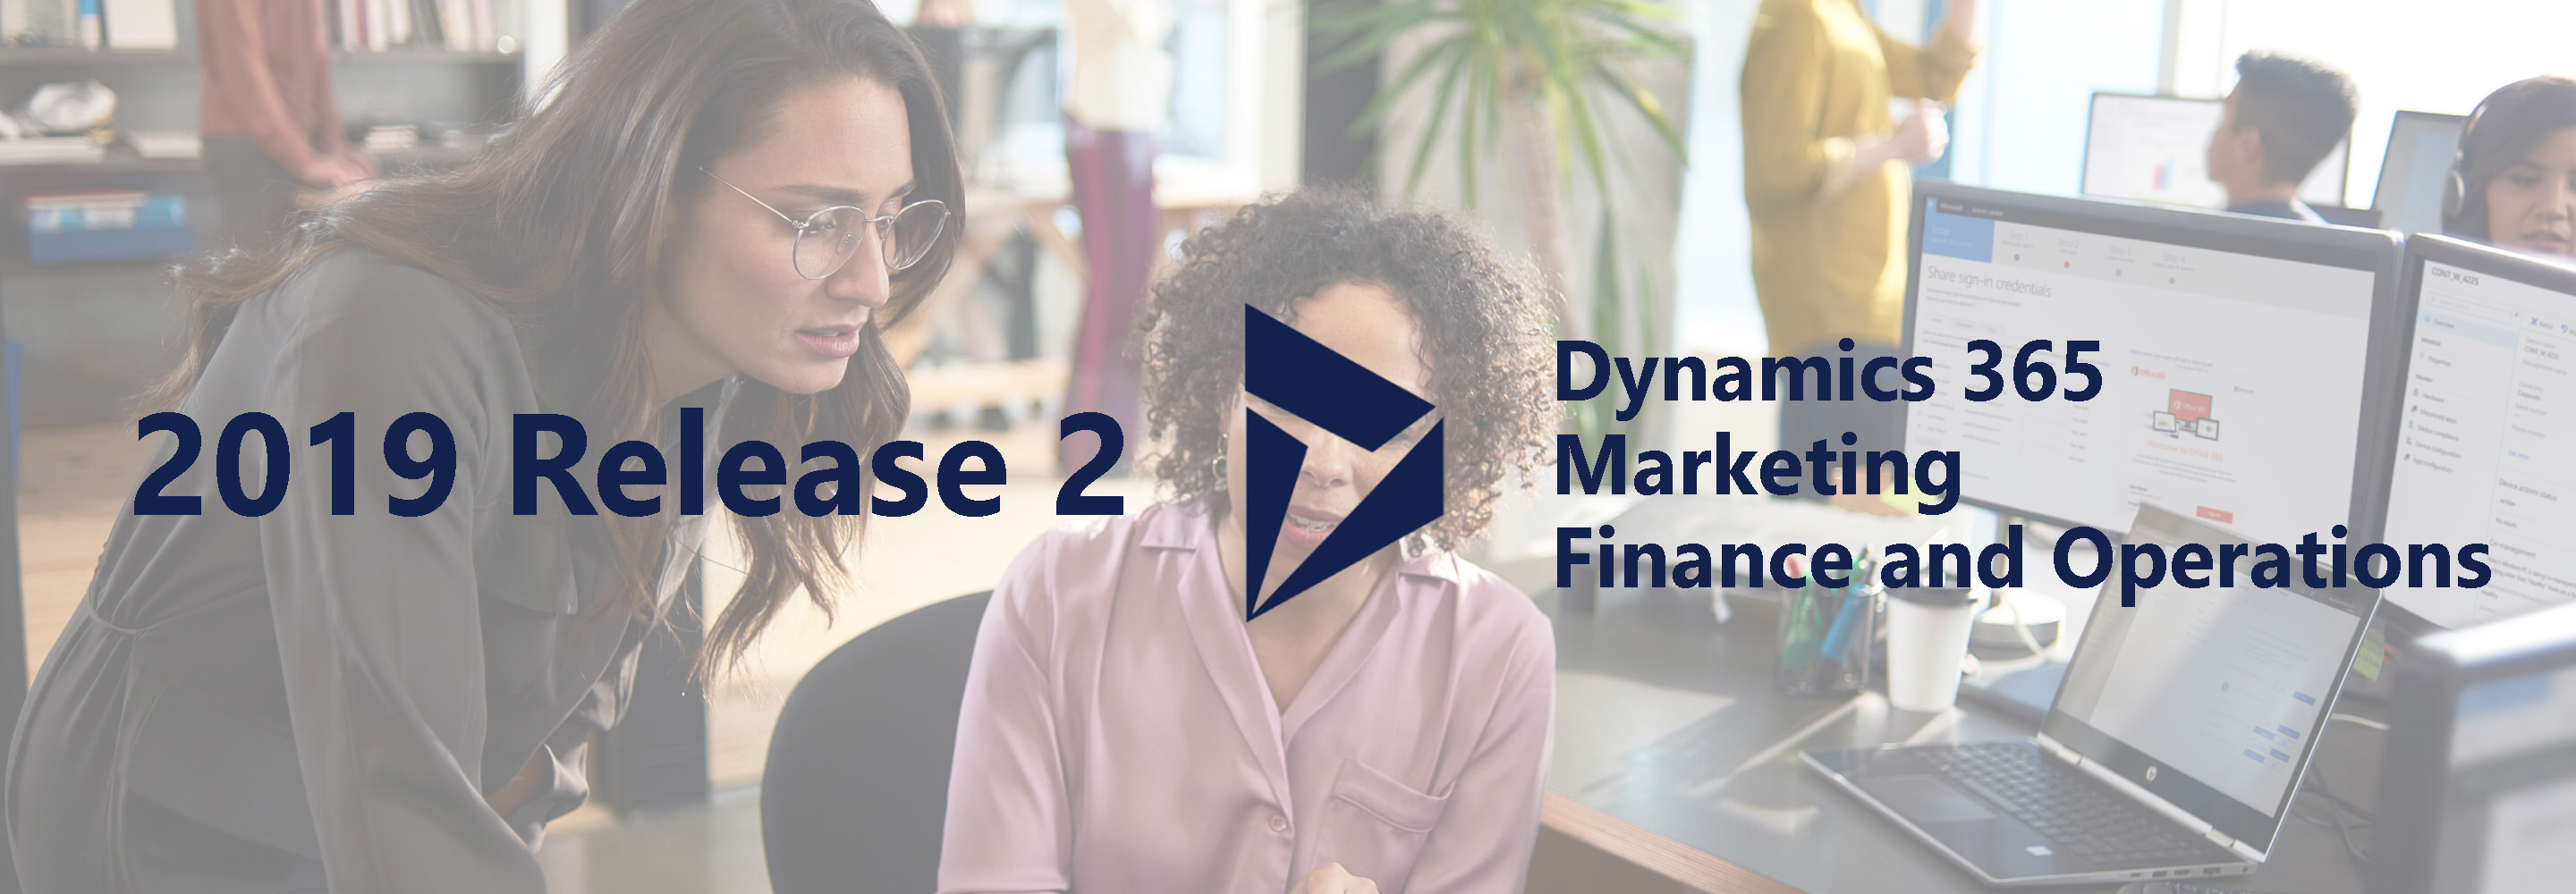 Actualización 2 Dynamics 365 for Marketing y Finance and Operations